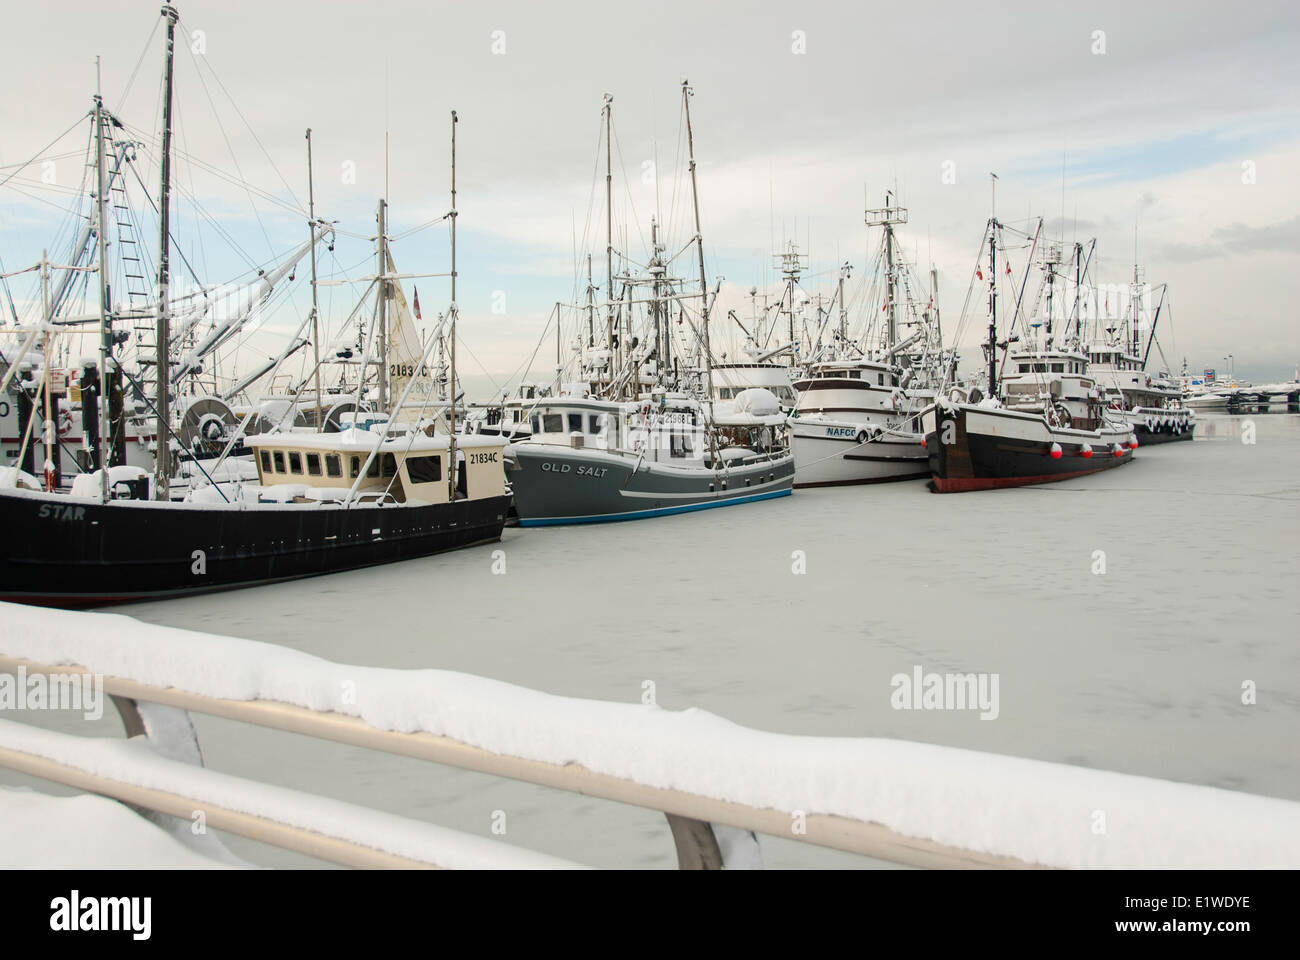 Fishing boats tied up for the winter freeze in Steveston Harbour, Steveston, Richmond, Metro Vancouver, British Columbia, Canada Stock Photo